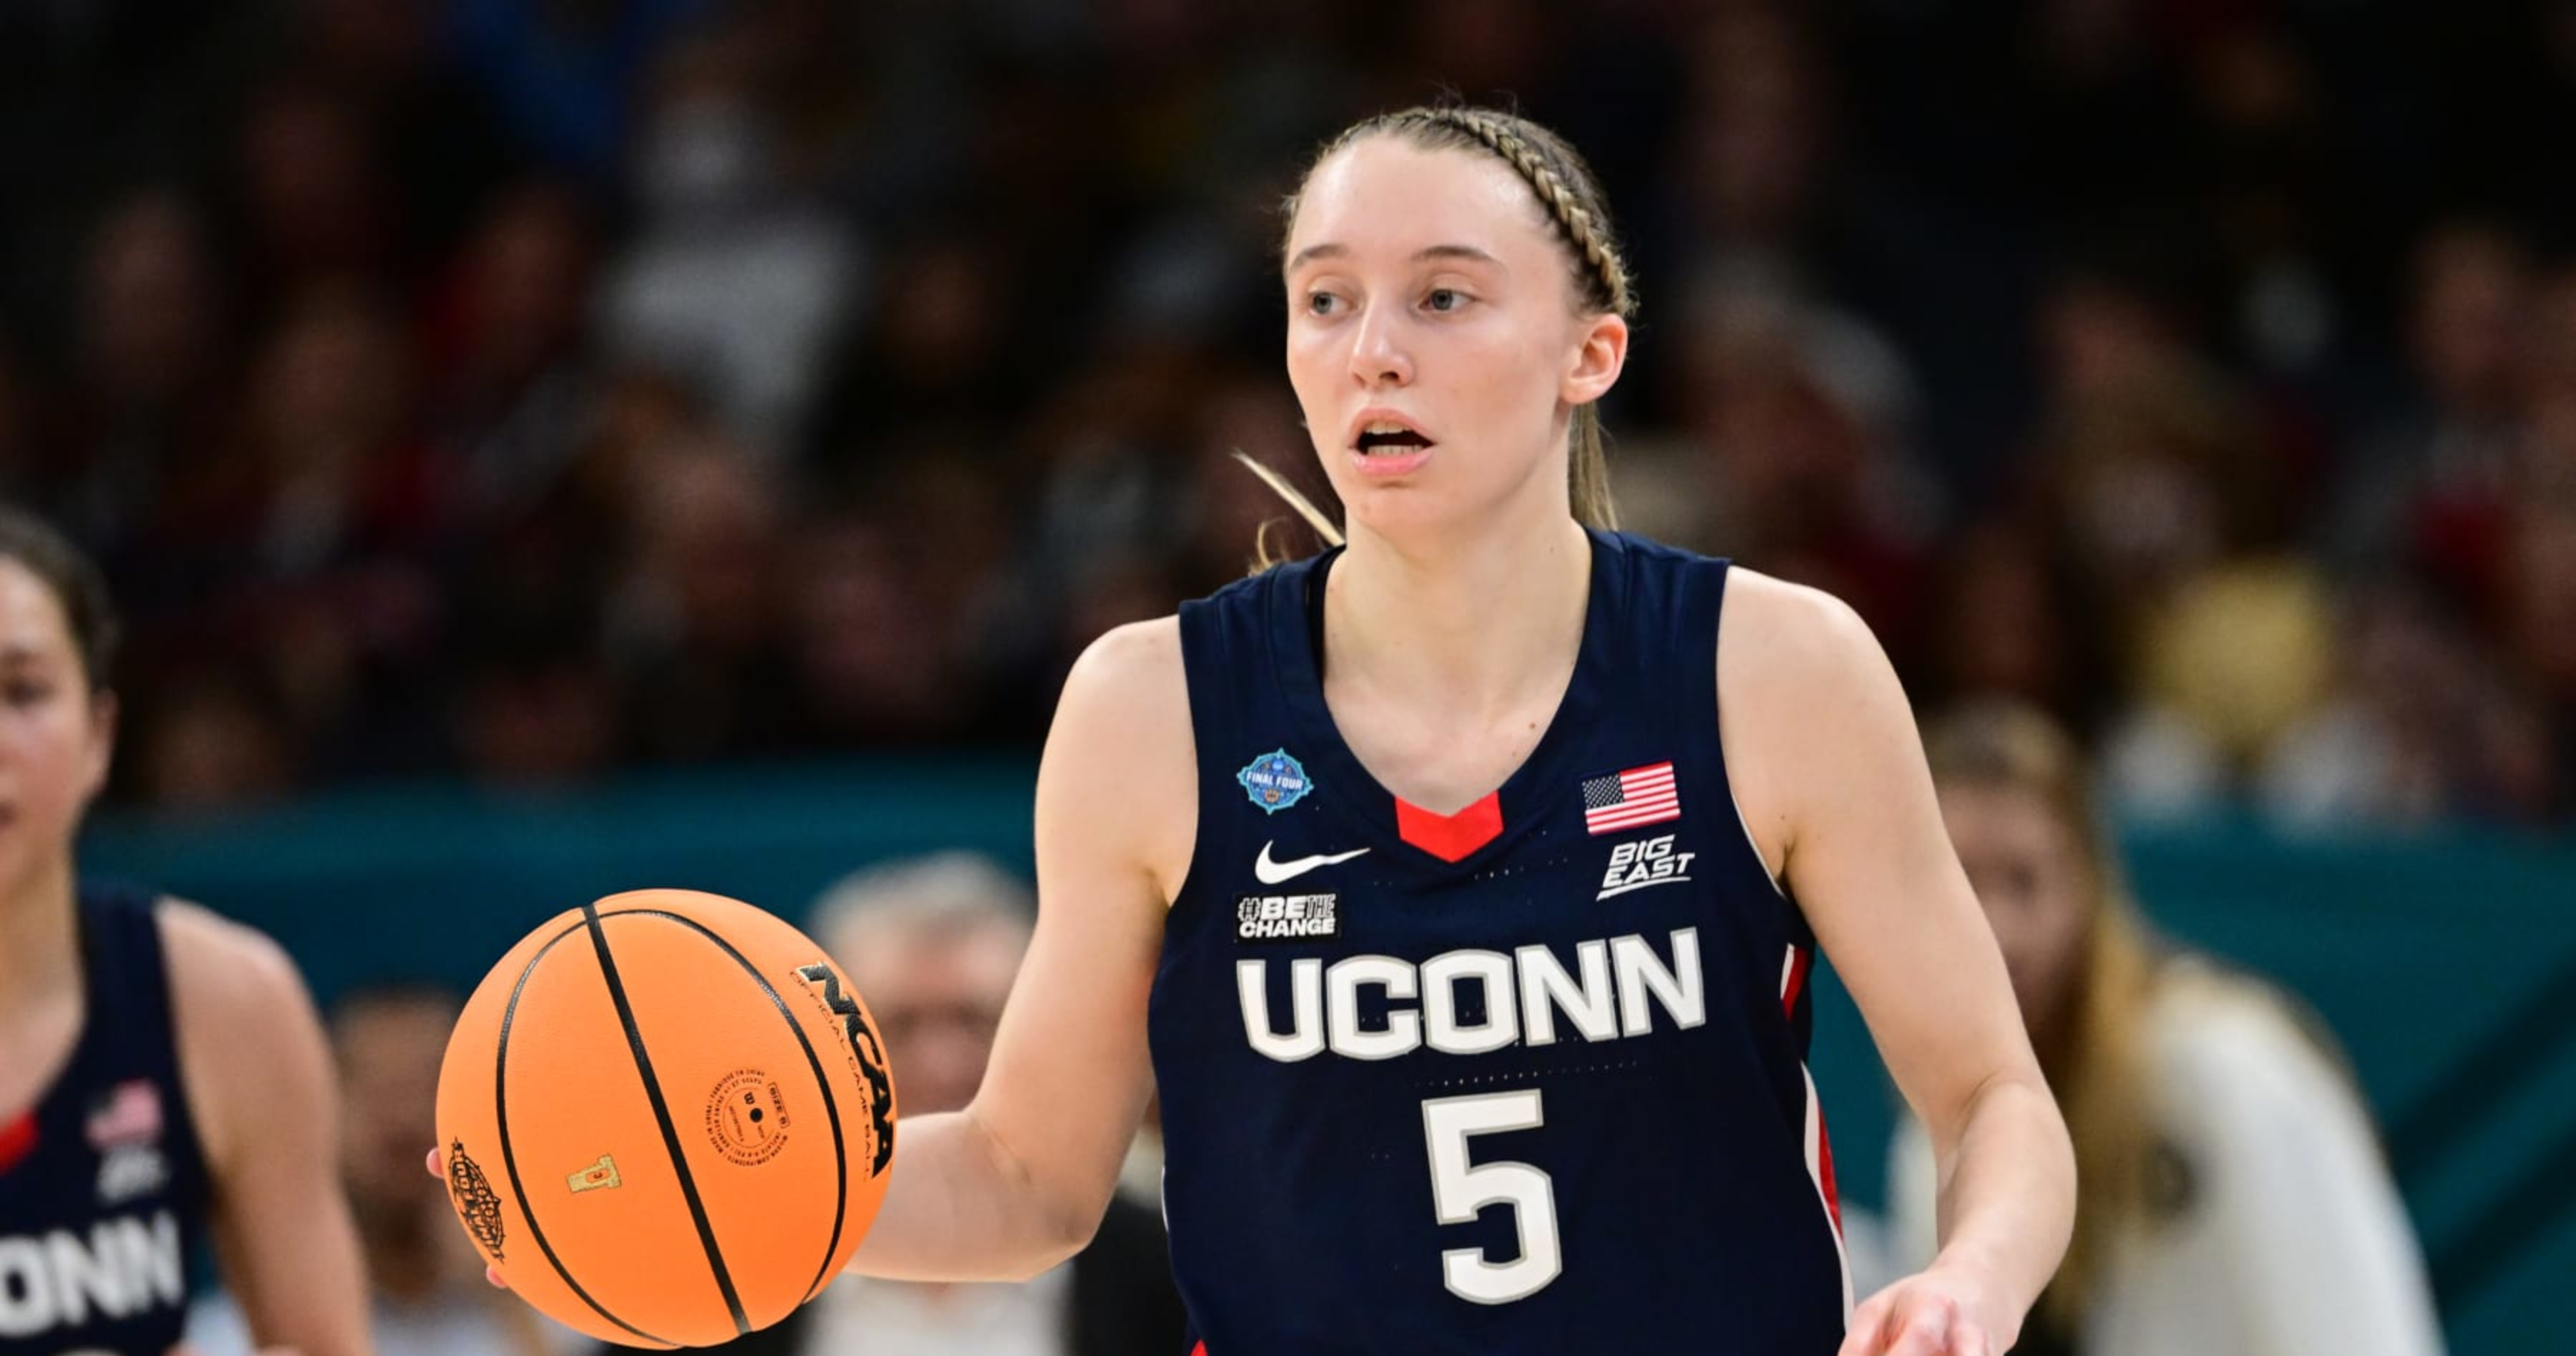 UConn's Paige Bueckers Tears ACL, Will Miss 202223 Season with Knee